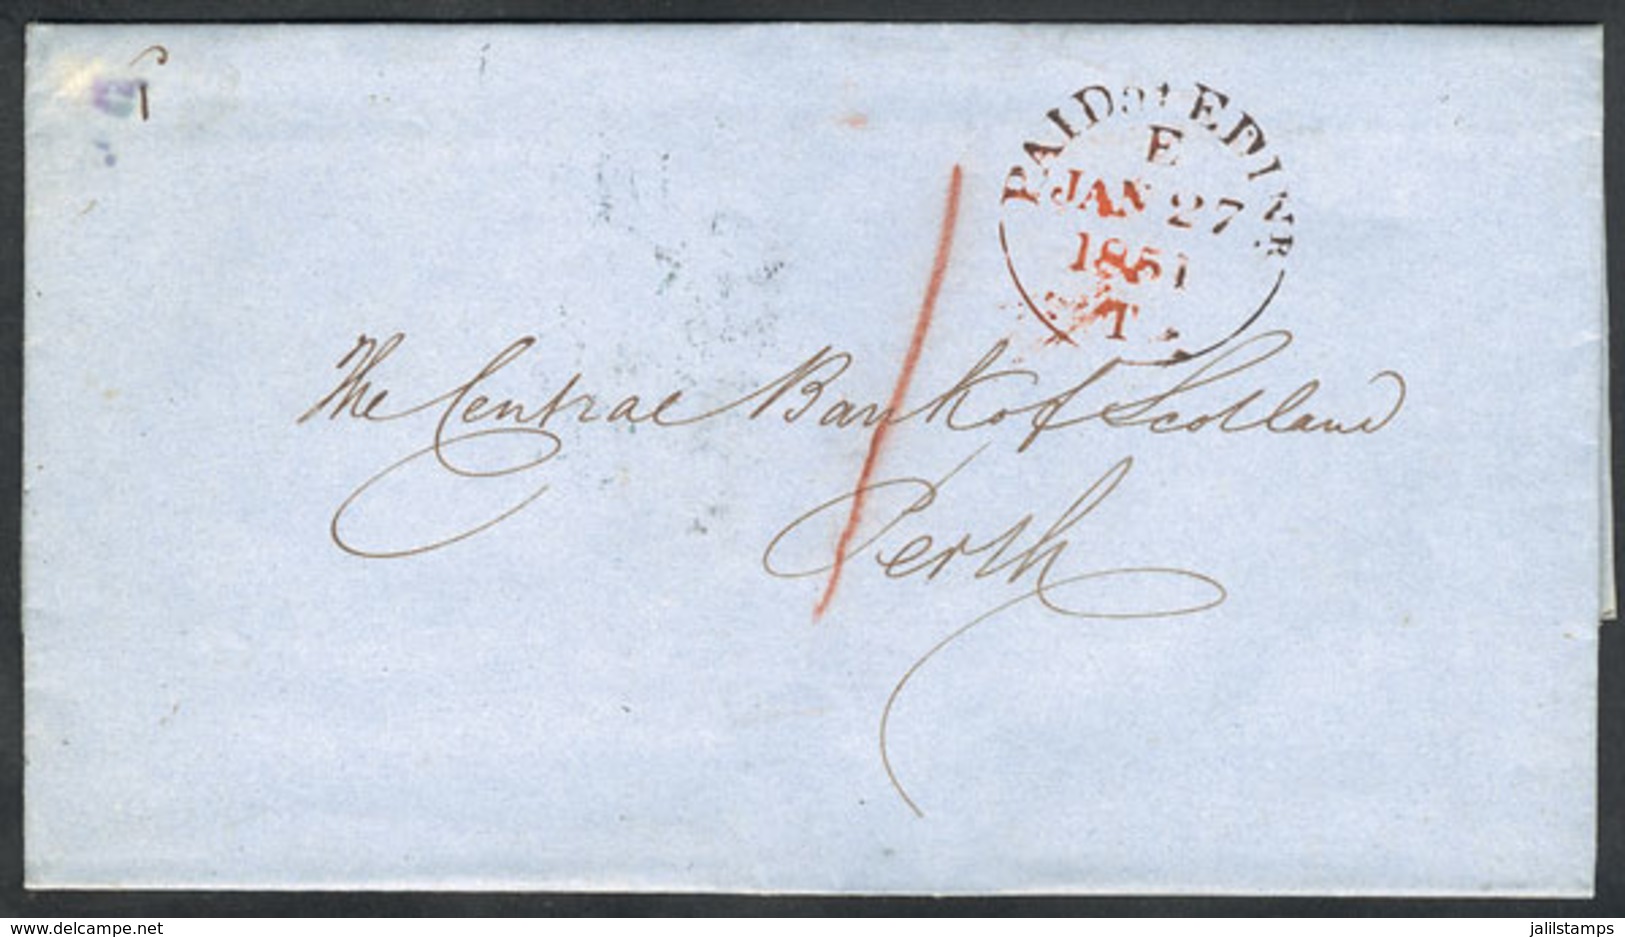 985 GREAT BRITAIN: Entire Letter Sent From EDINBURGH To Perth On 27/JA/1851, With Rimless Datestamp "PAID AT EDINr. - E  - Officials